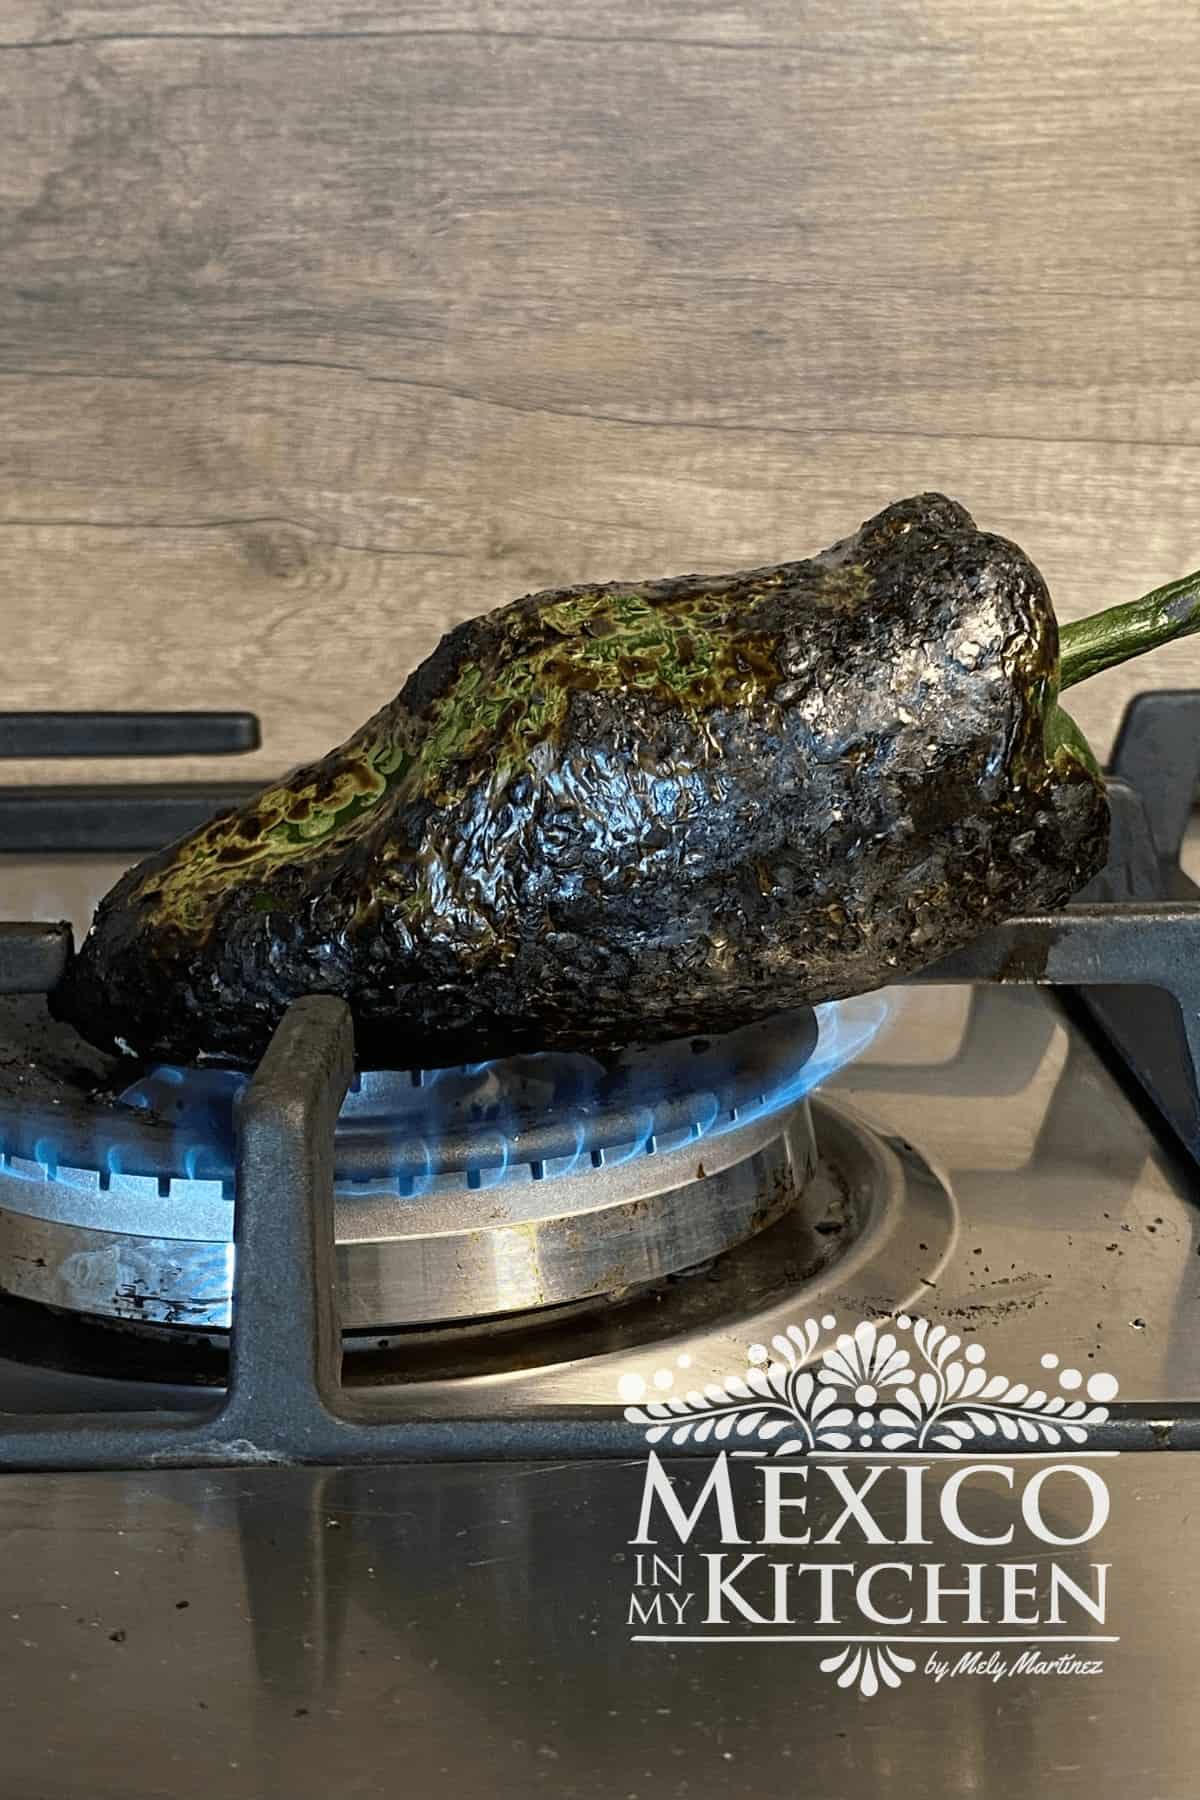 Roasted poblano peppers on an open fire